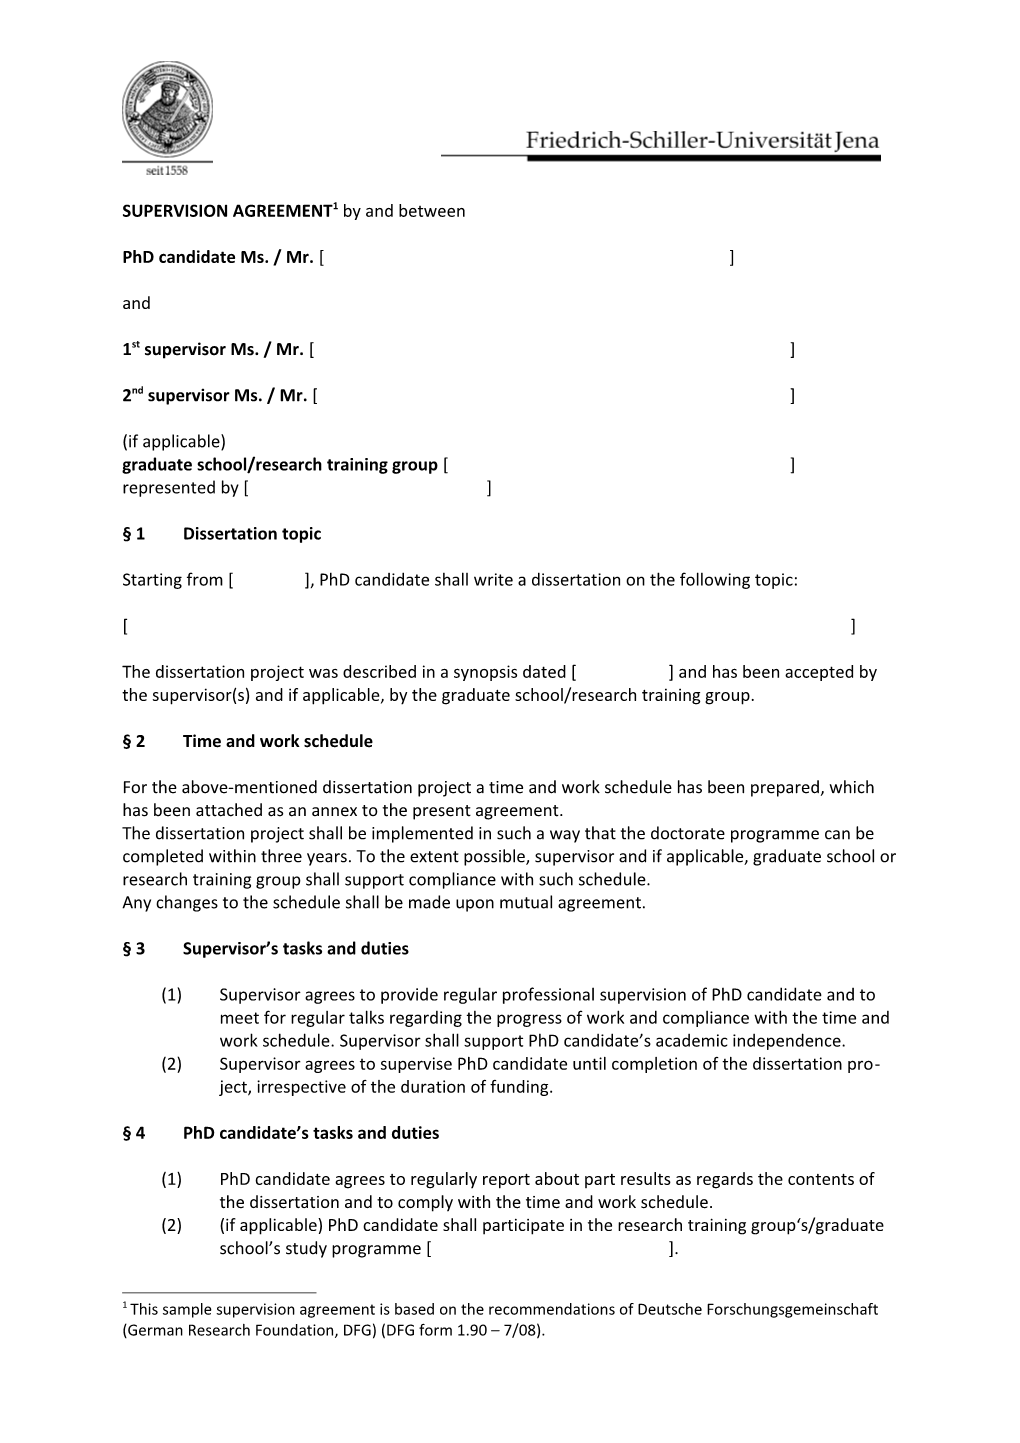 SUPERVISION AGREEMENT 1 by and Between